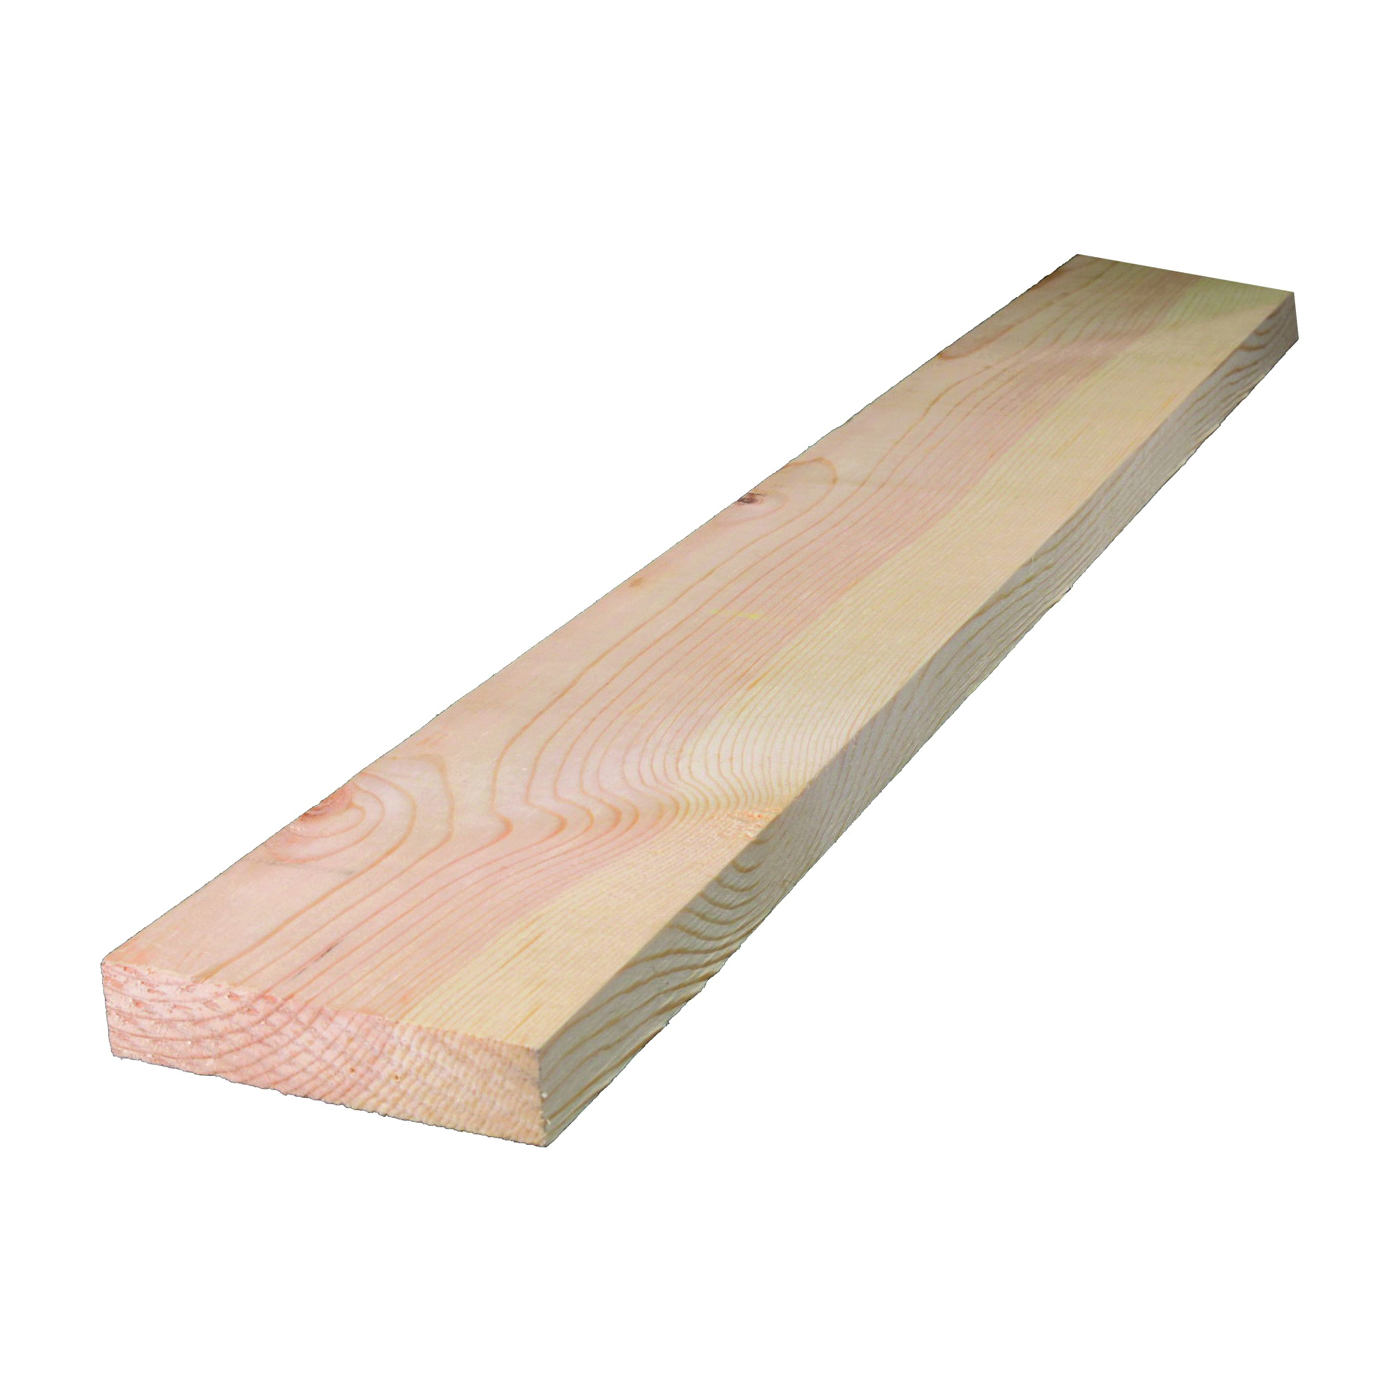 0Q1X4-70096C Common Board, 8 ft L Nominal, 4 in W Nominal, 1 in Thick Nominal